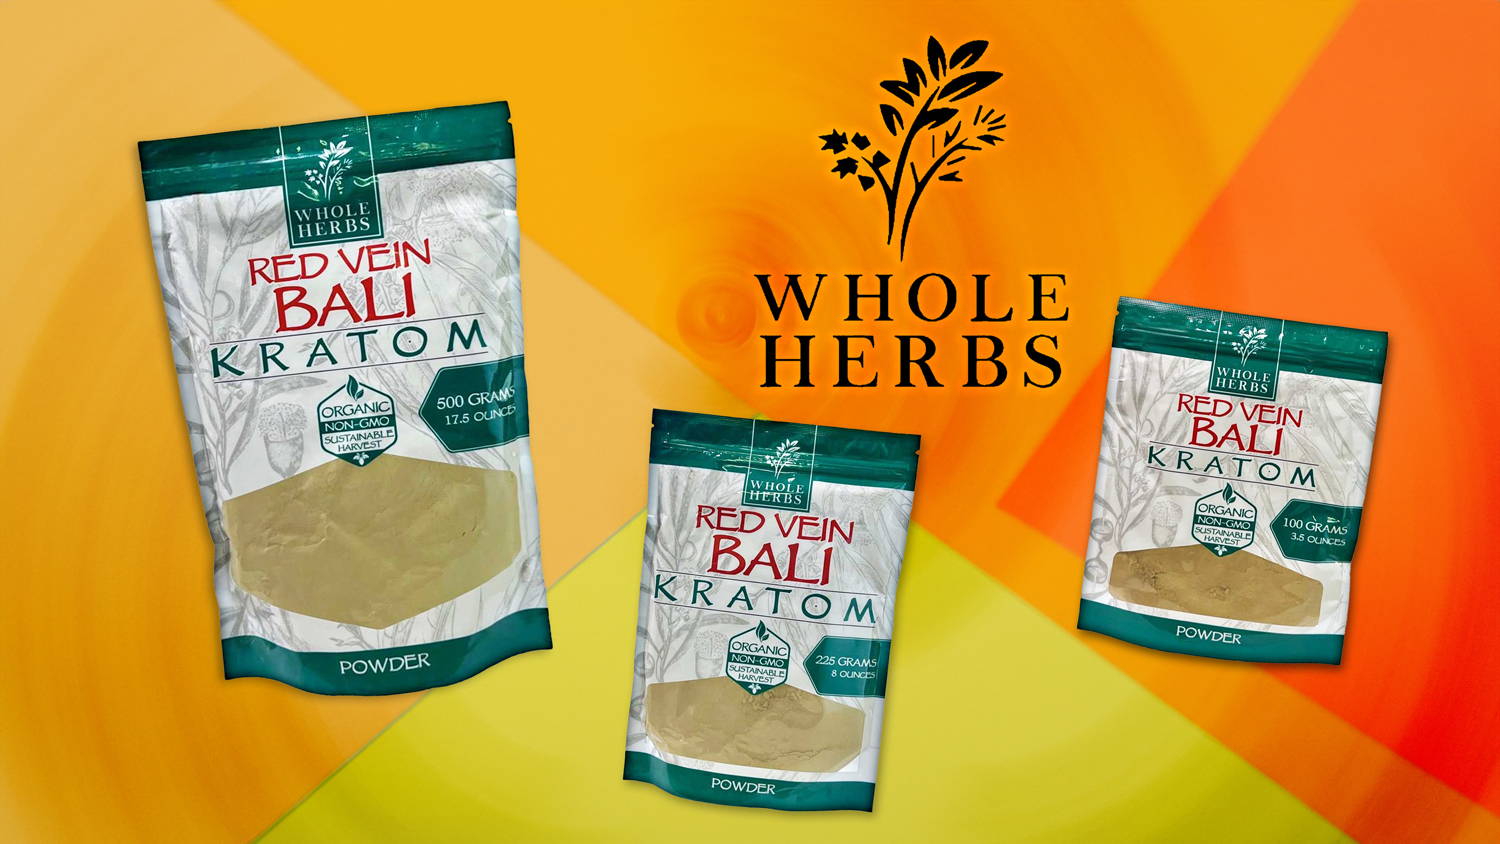 Whole Herbs Red Vein Bali 3.5, 8, and 17.5 Ounce Powder Banner